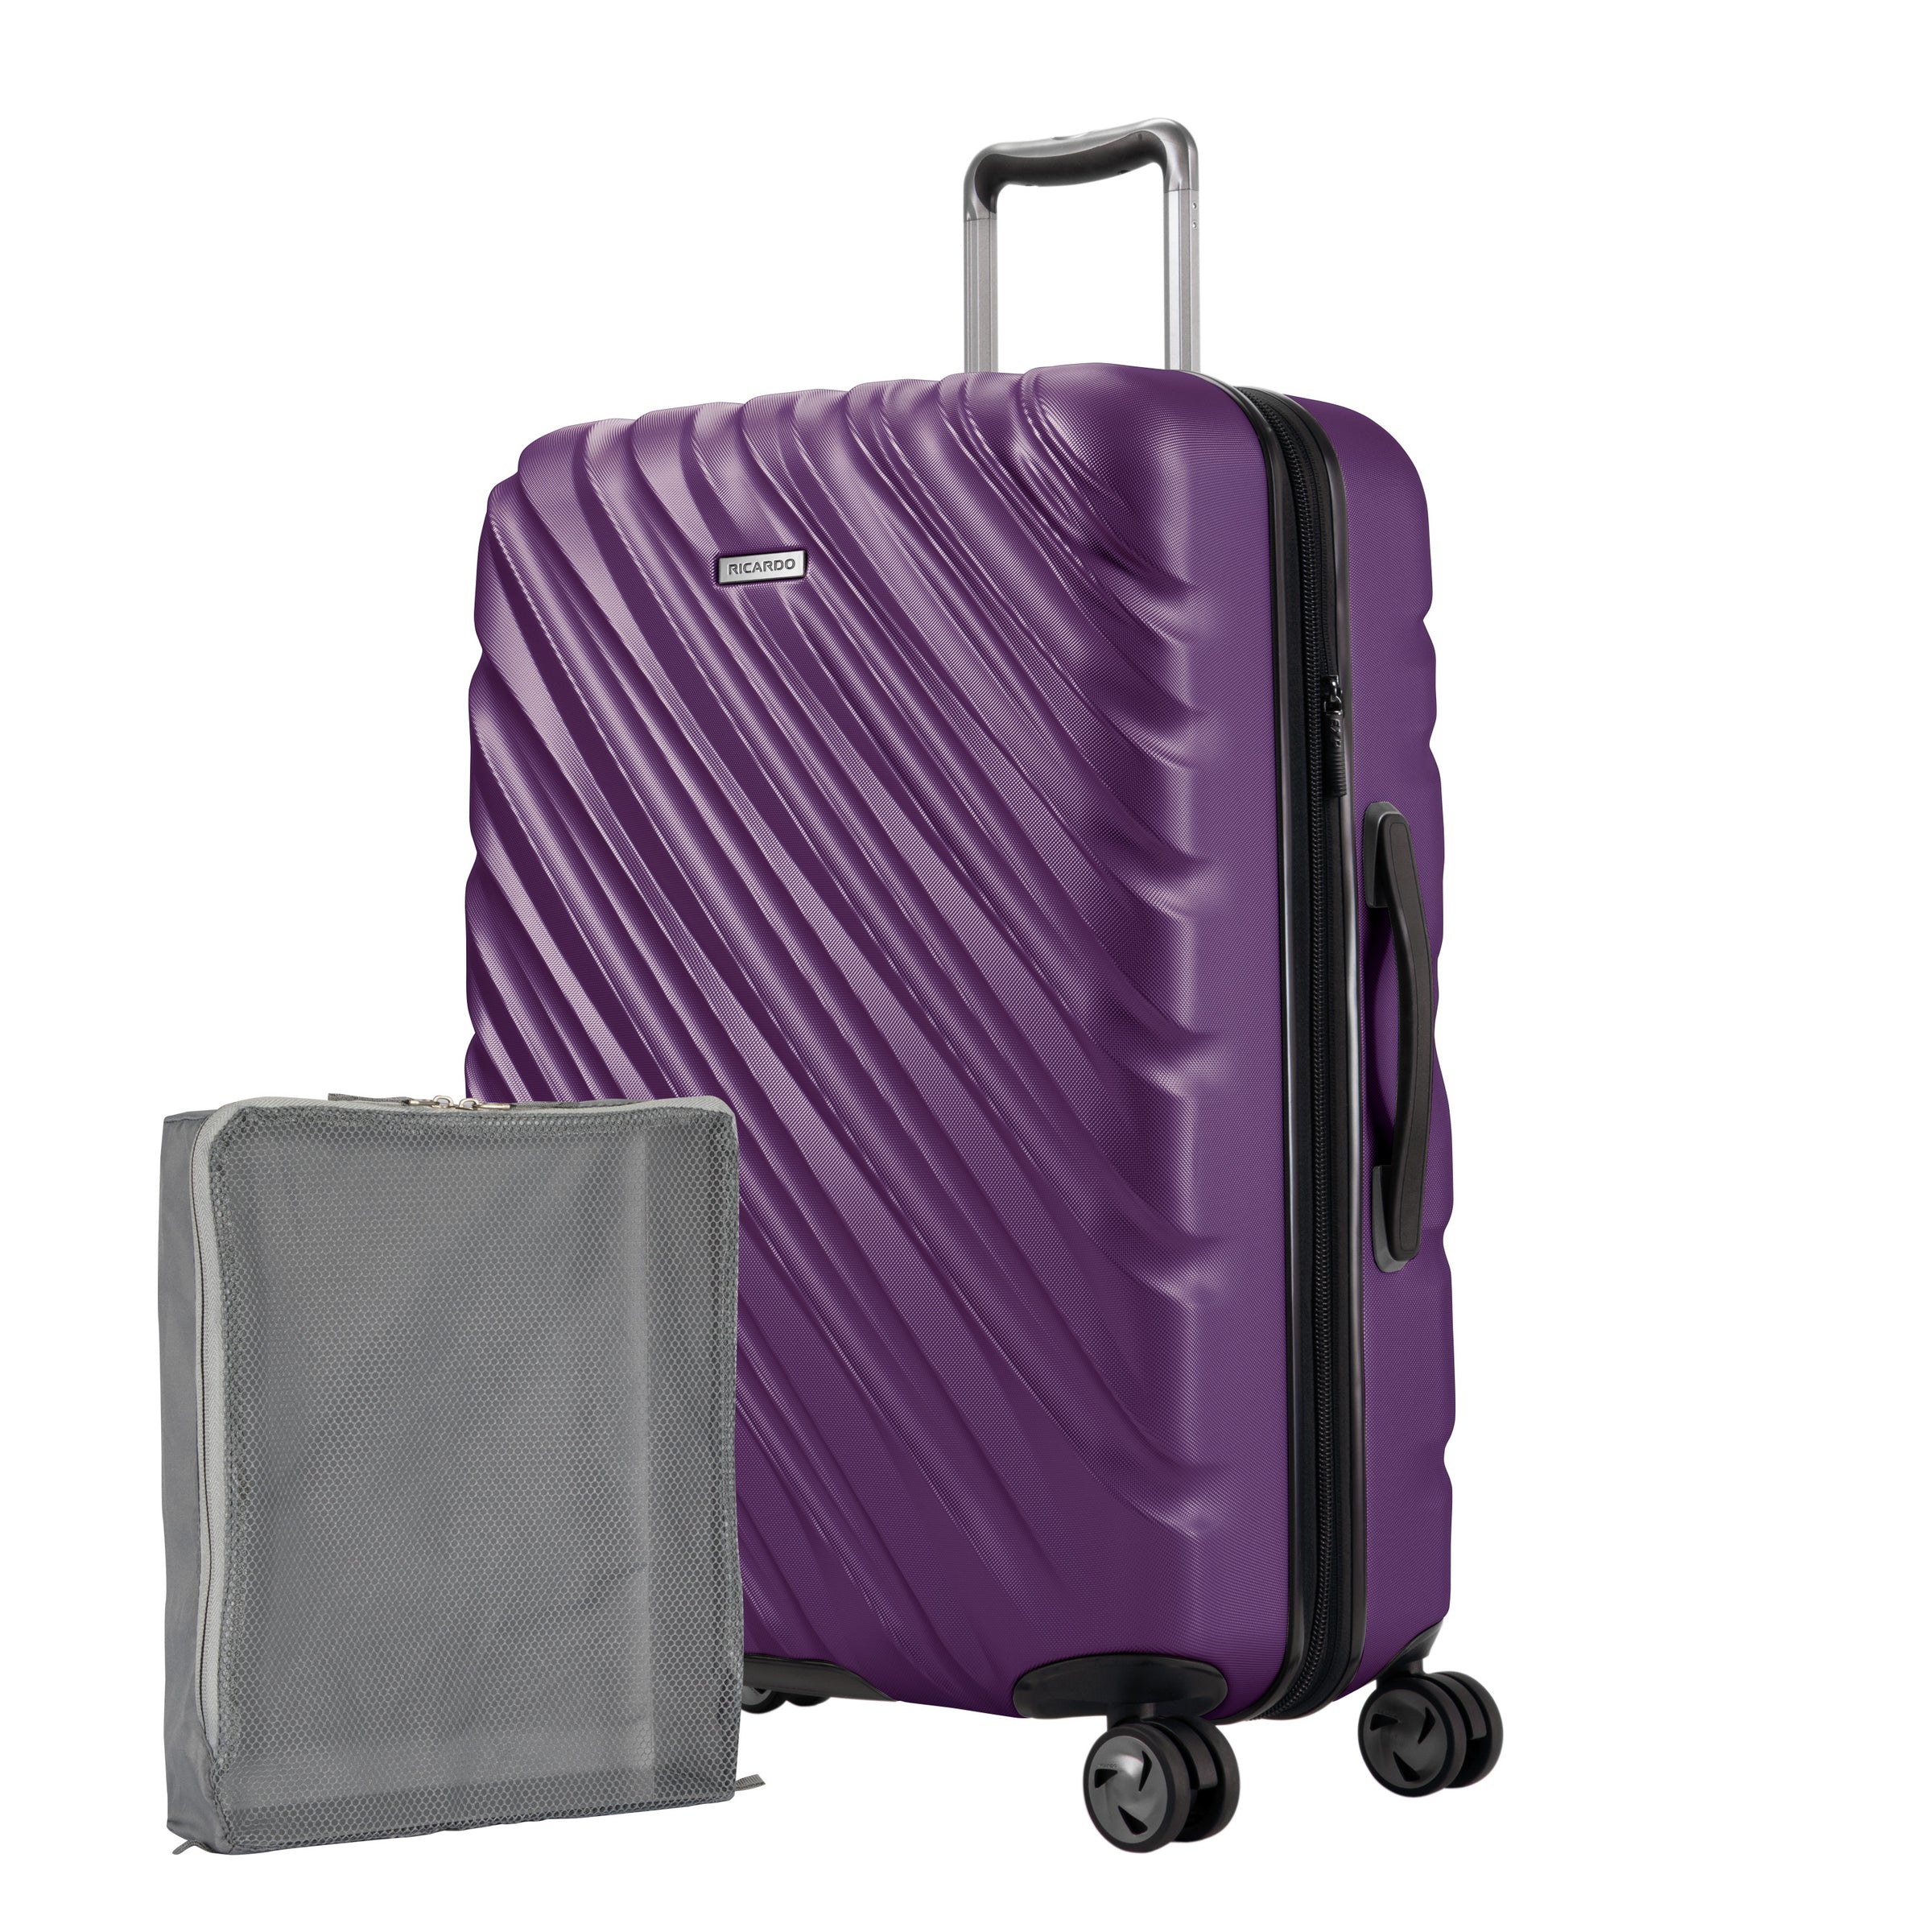 Aubergine purple Ricardo Mojave hardside suitcase with diagonal grooves shown with a large grey packing cube